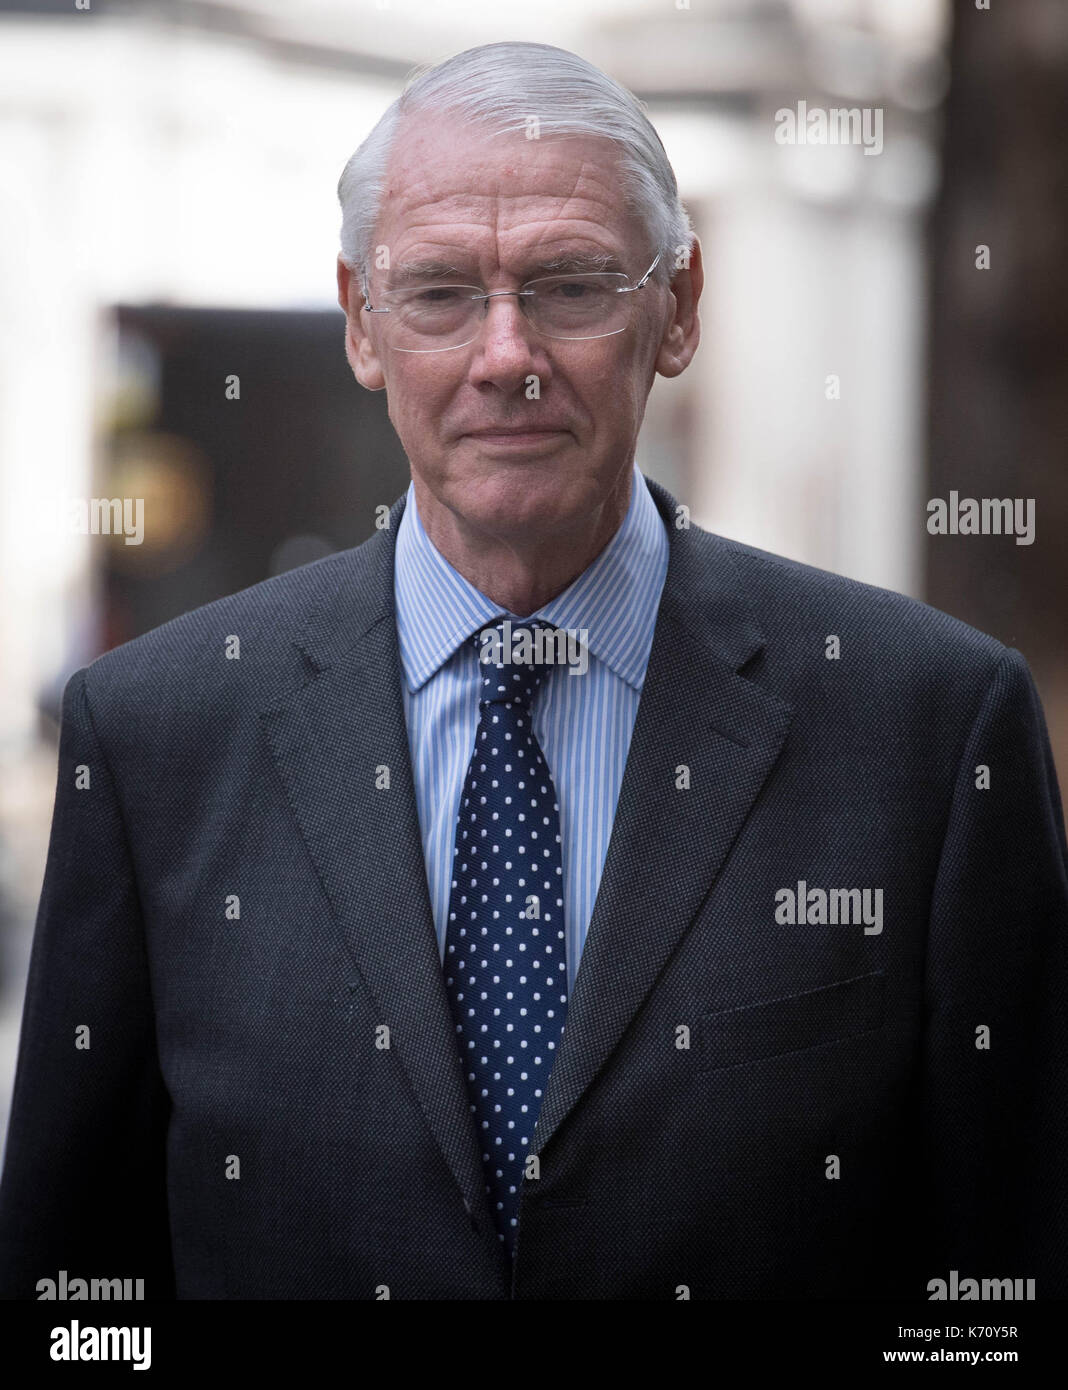 Sir Martin Moore-Bick, chairman of the Grenfell public inquiry arrives at the High Court in London, as he will deliver his opening statement in the first public hearing of the contentious probe on Thursday. Stock Photo